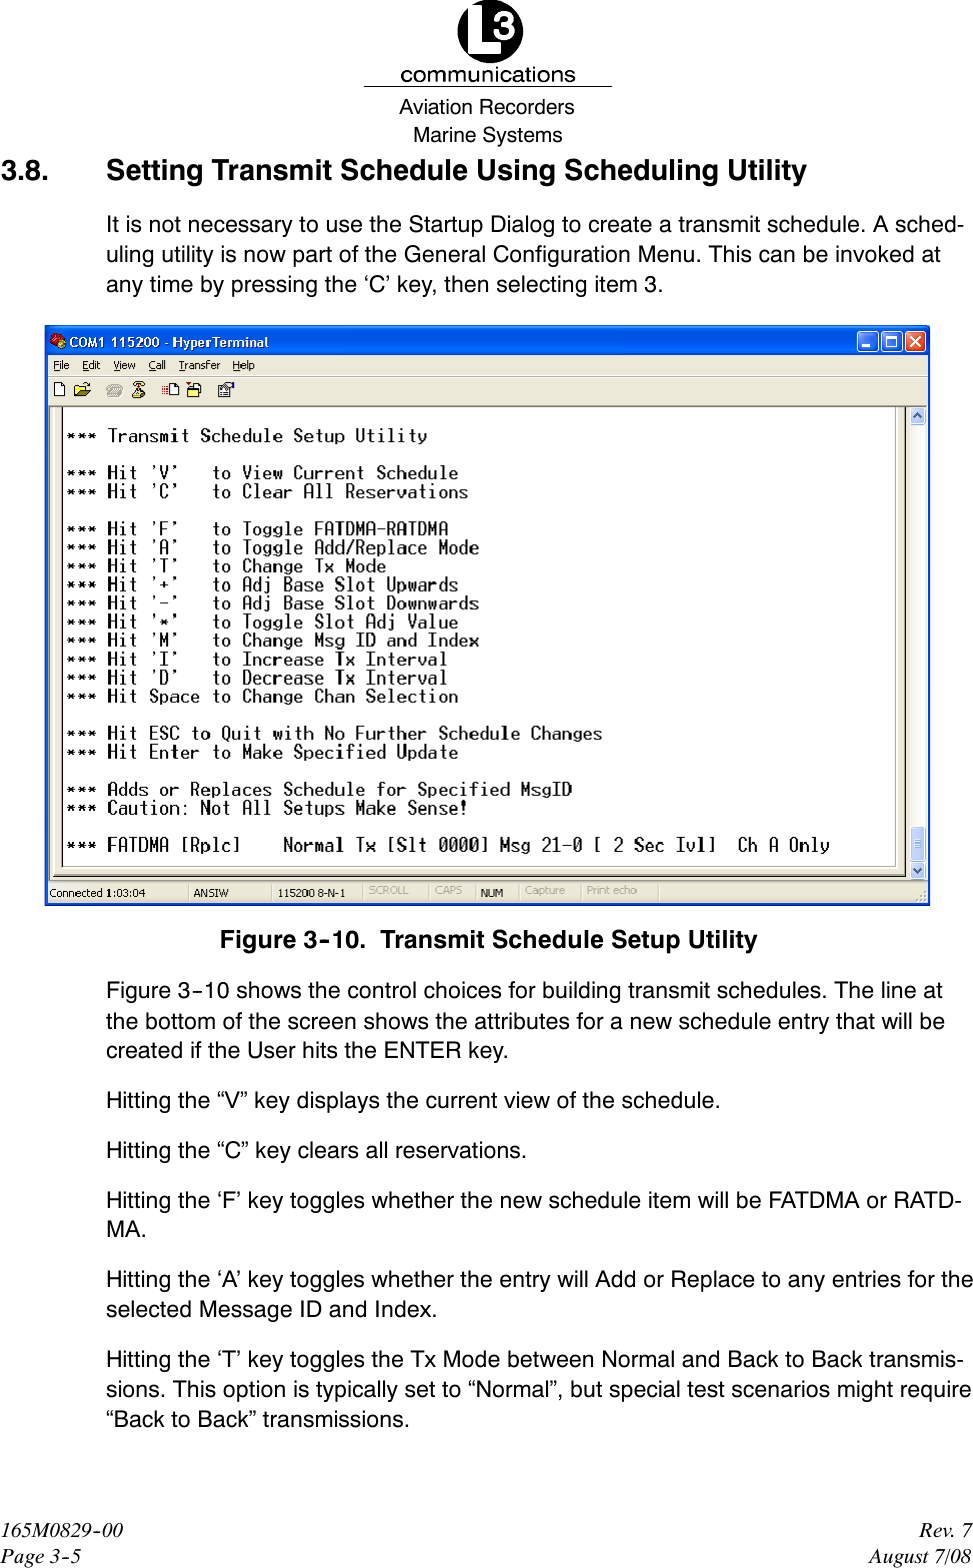 Marine SystemsAviation RecordersRev. 7August 7/08165M0829--00Page 3--53.8. Setting Transmit Schedule Using Scheduling UtilityIt is not necessary to use the Startup Dialog to create a transmit schedule. A sched-uling utility is now part of the General Configuration Menu. This can be invoked atany time by pressing the ‘C’ key, then selecting item 3.Figure 3--10. Transmit Schedule Setup UtilityFigure 3--10 shows the control choices for building transmit schedules. The line atthe bottom of the screen shows the attributes for a new schedule entry that will becreated if the User hits the ENTER key.Hitting the “V” key displays the current view of the schedule.Hitting the “C” key clears all reservations.Hitting the ‘F’ key toggles whether the new schedule item will be FATDMA or RATD-MA.Hitting the ‘A’ key toggles whether the entry will Add or Replace to any entries for theselected Message ID and Index.Hitting the ‘T’ key toggles the Tx Mode between Normal and Back to Back transmis-sions. This option is typically set to “Normal”, but special test scenarios might require“Back to Back” transmissions.